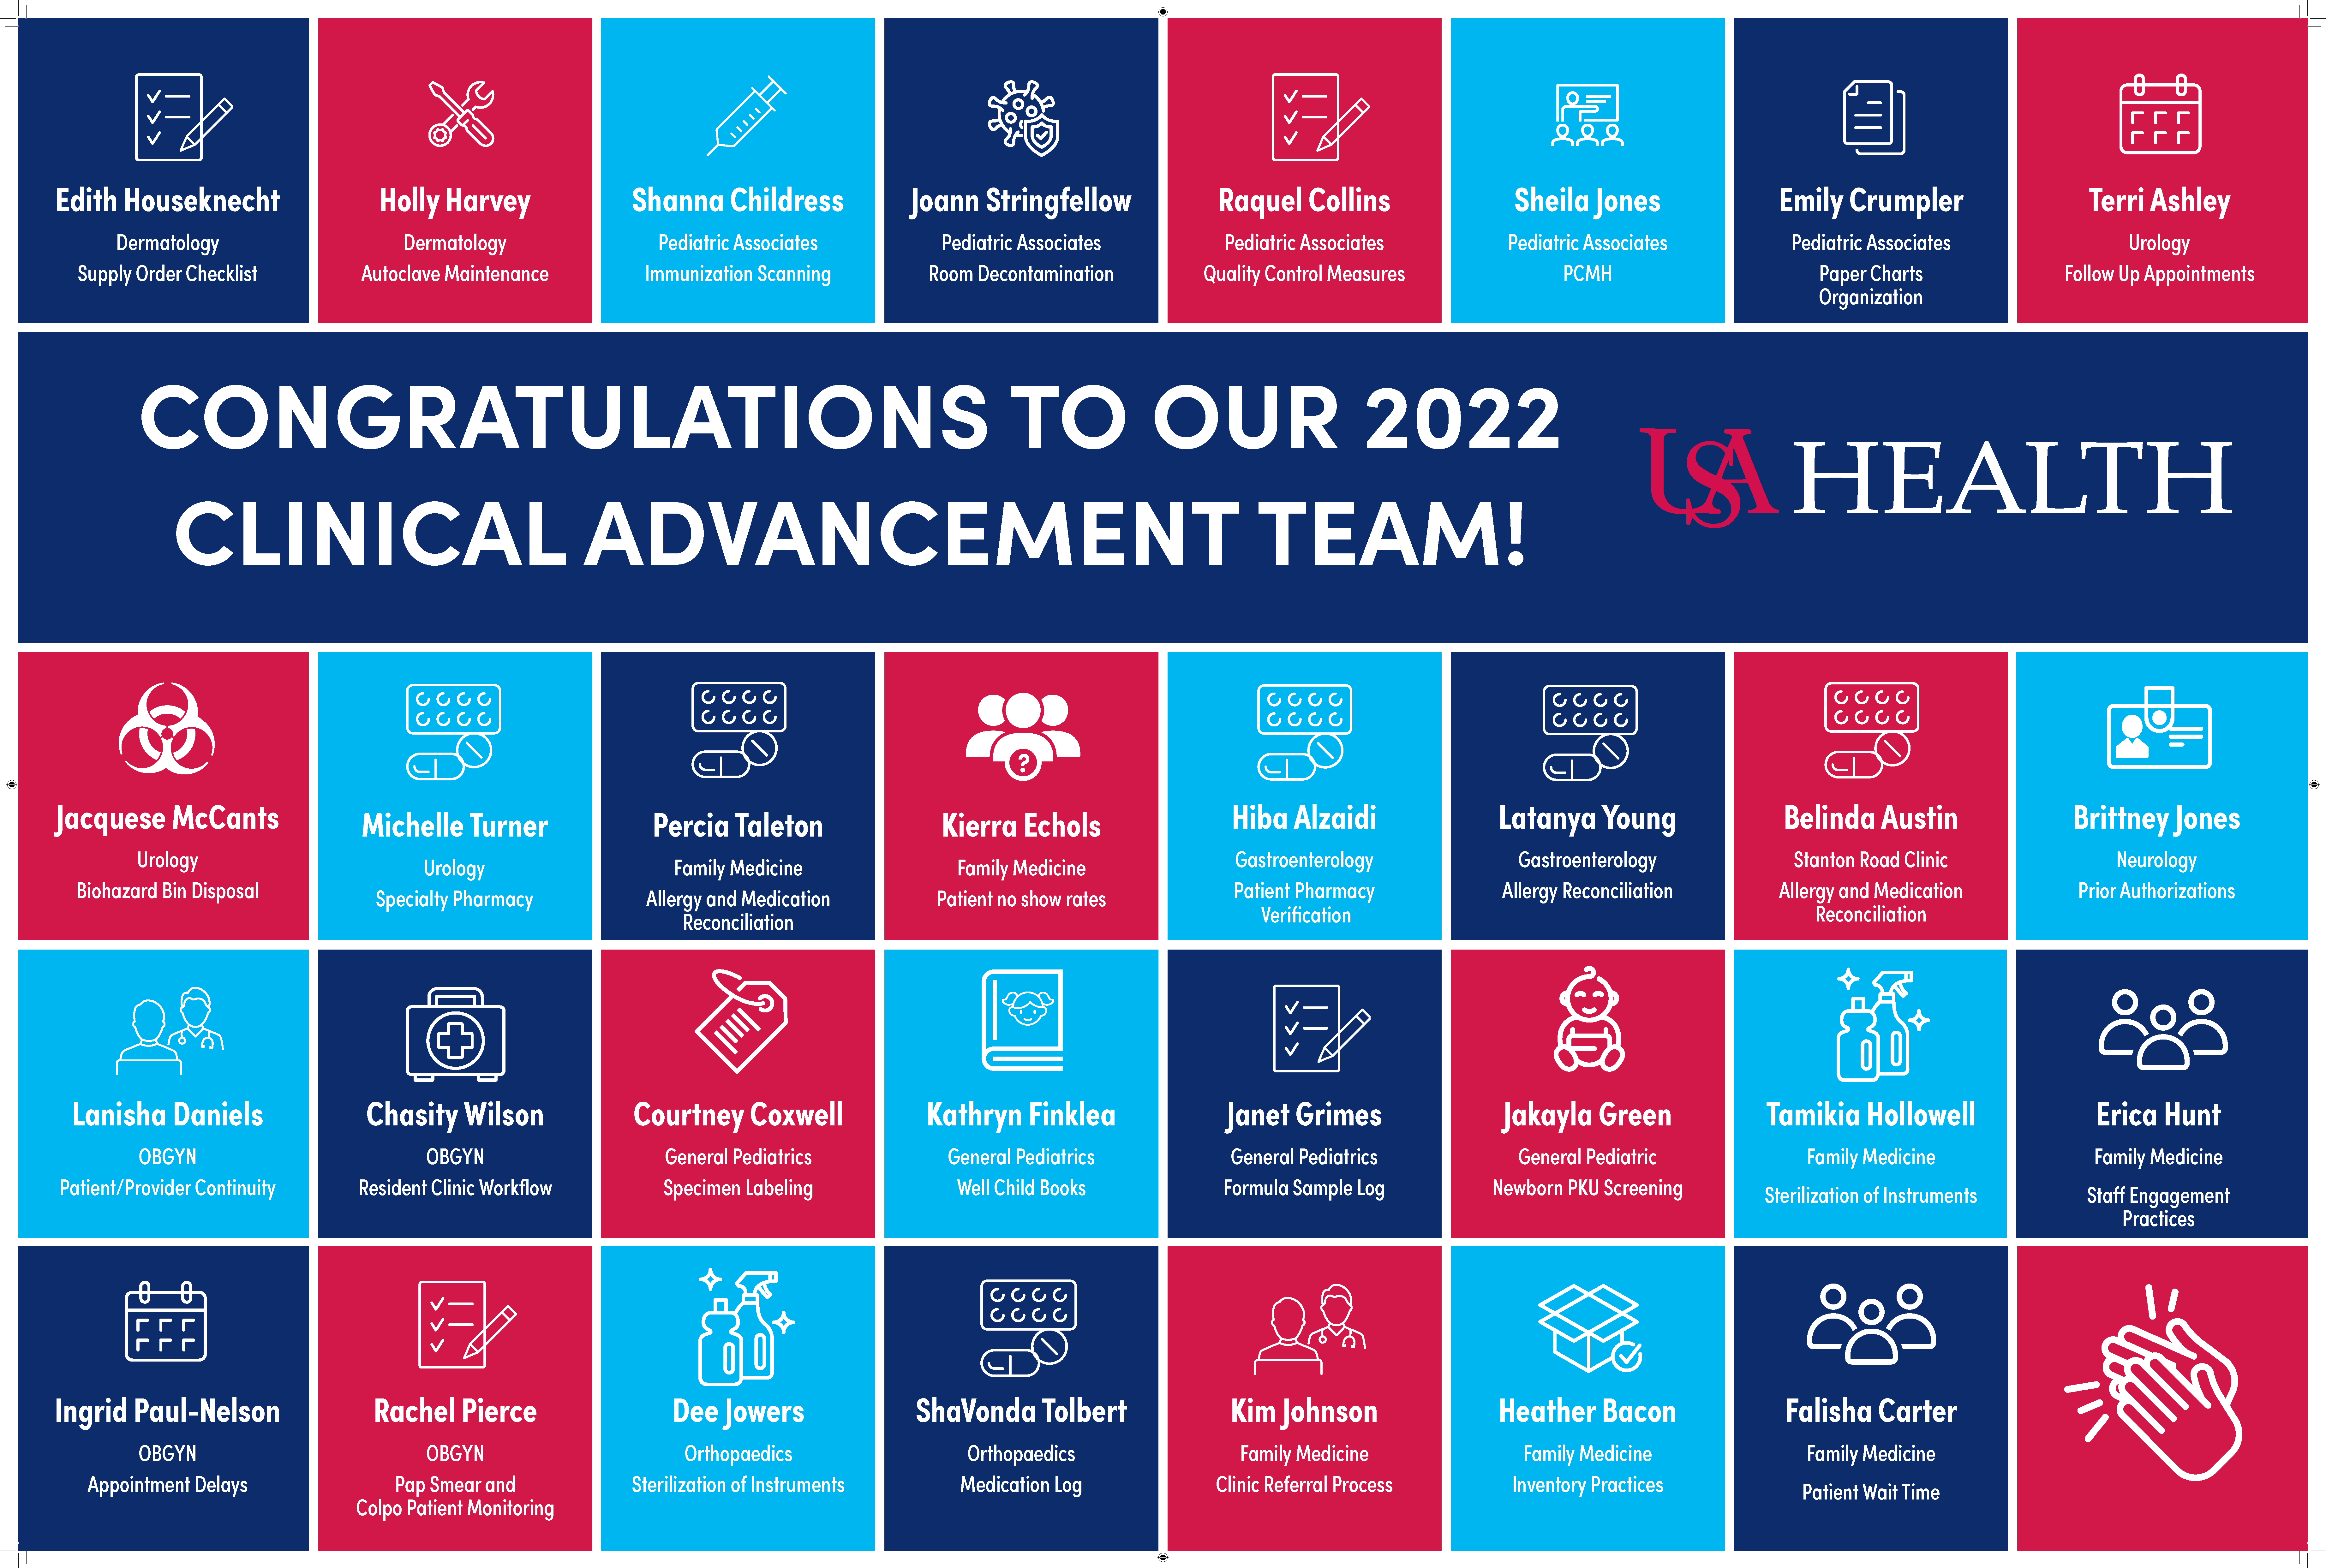 2022 Clinical Advancement members named